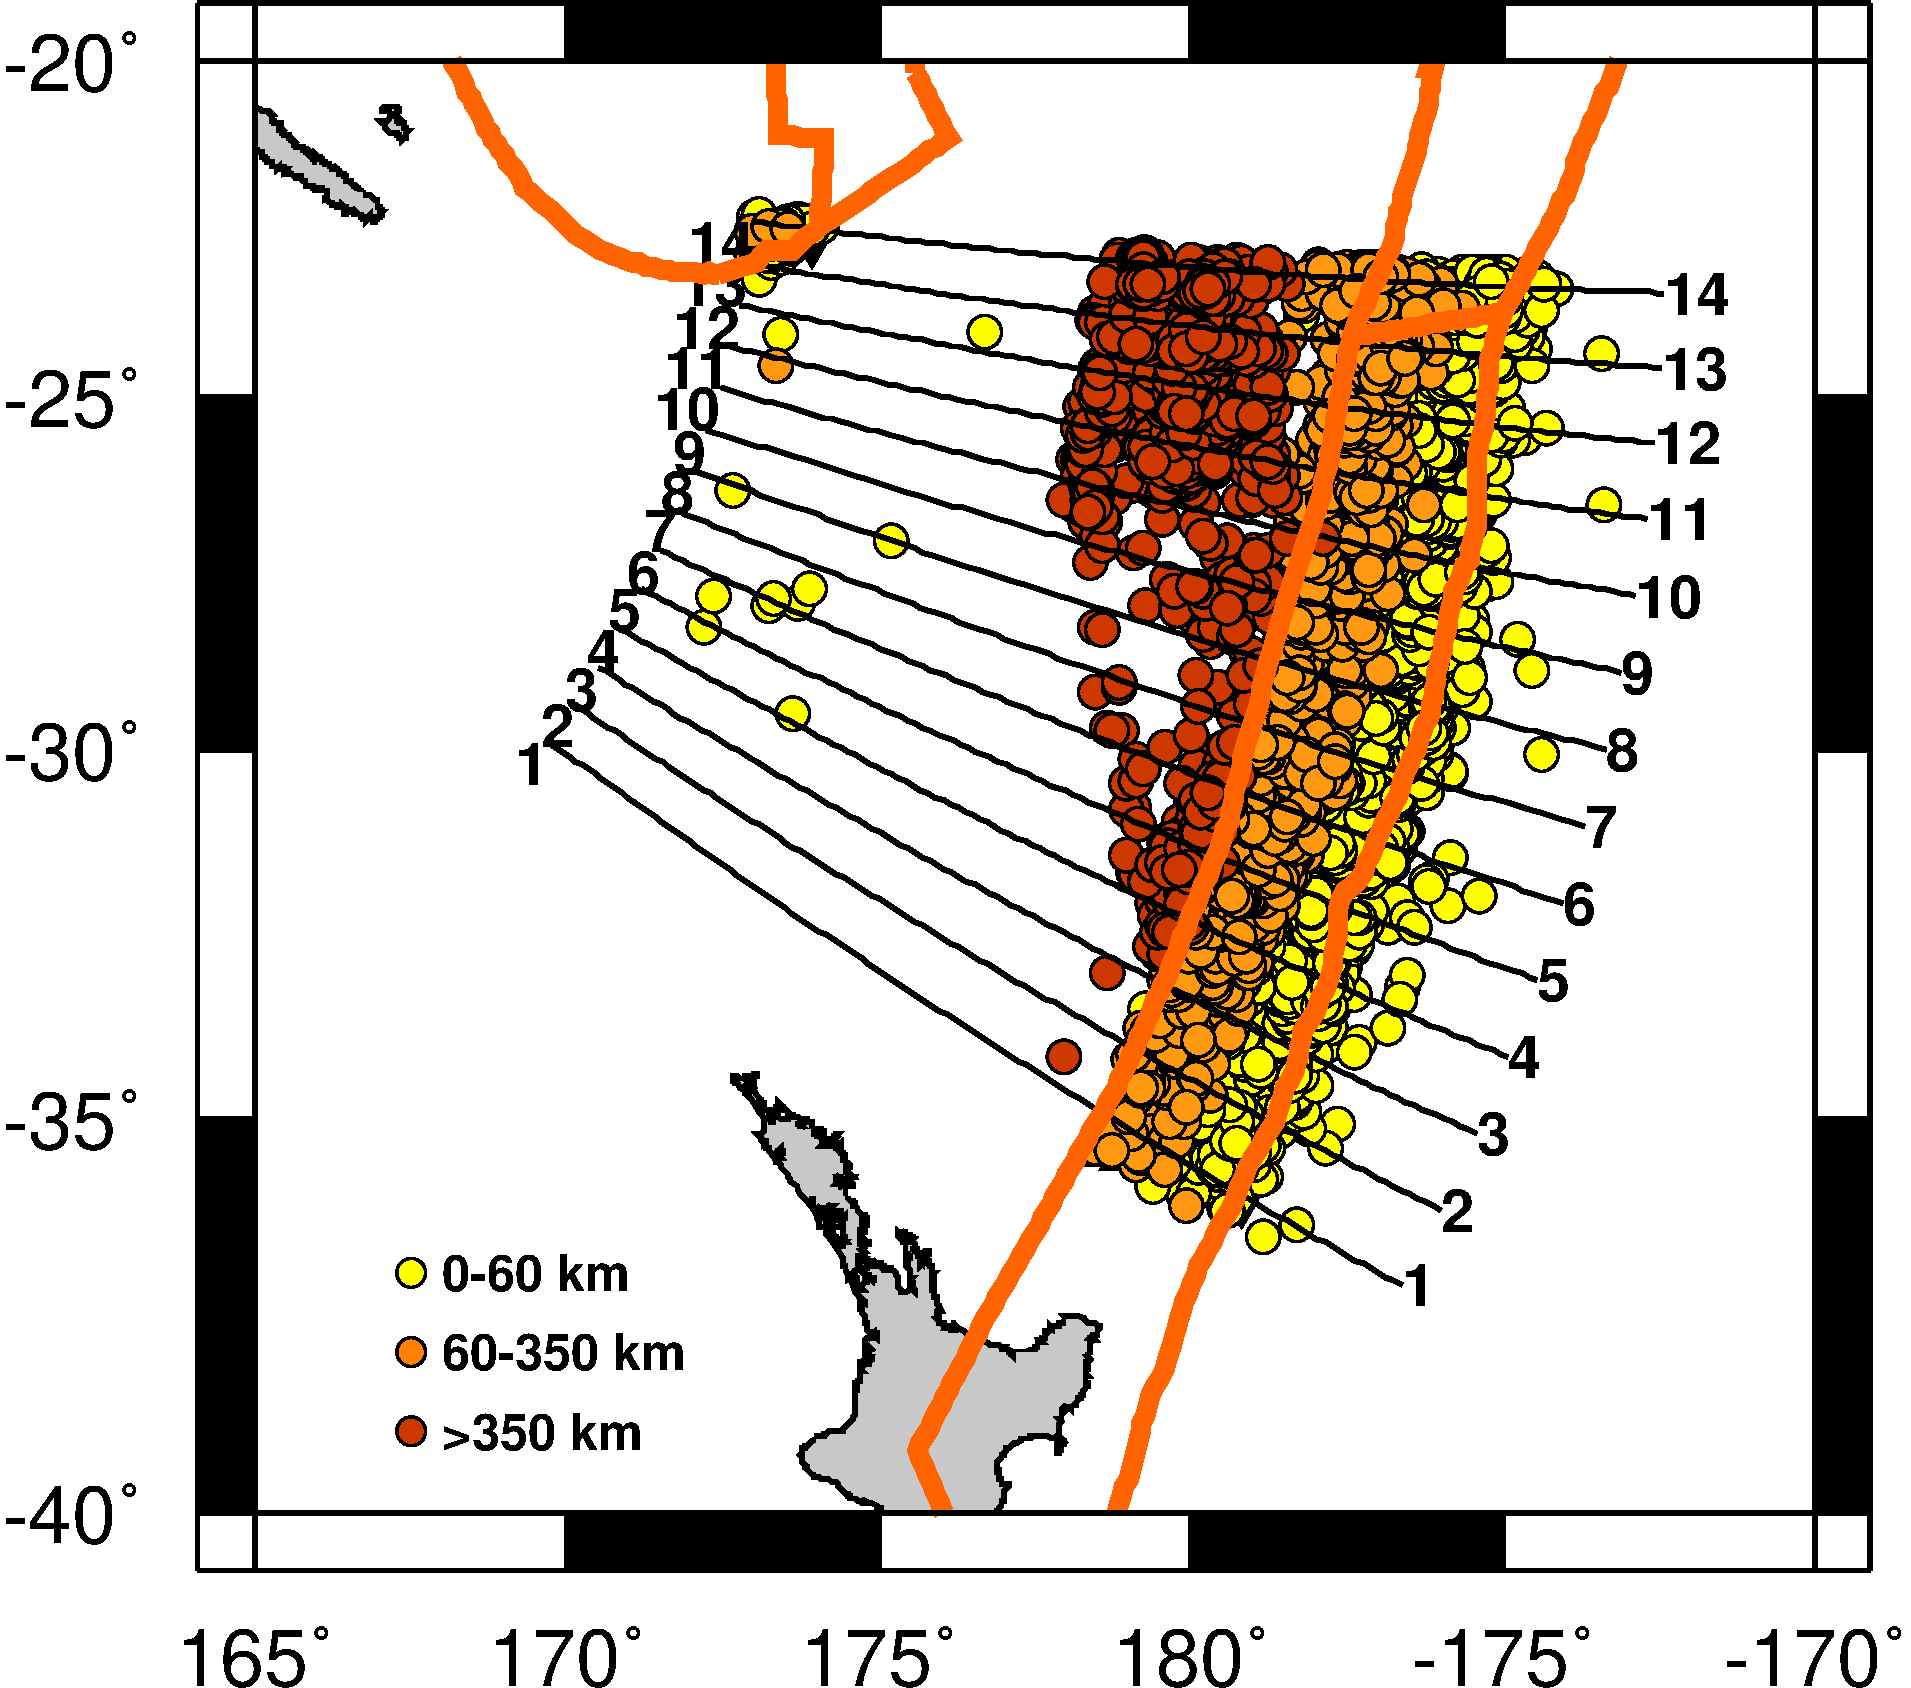 ISC-EHB: Maps and Cross Sections - Kermadec